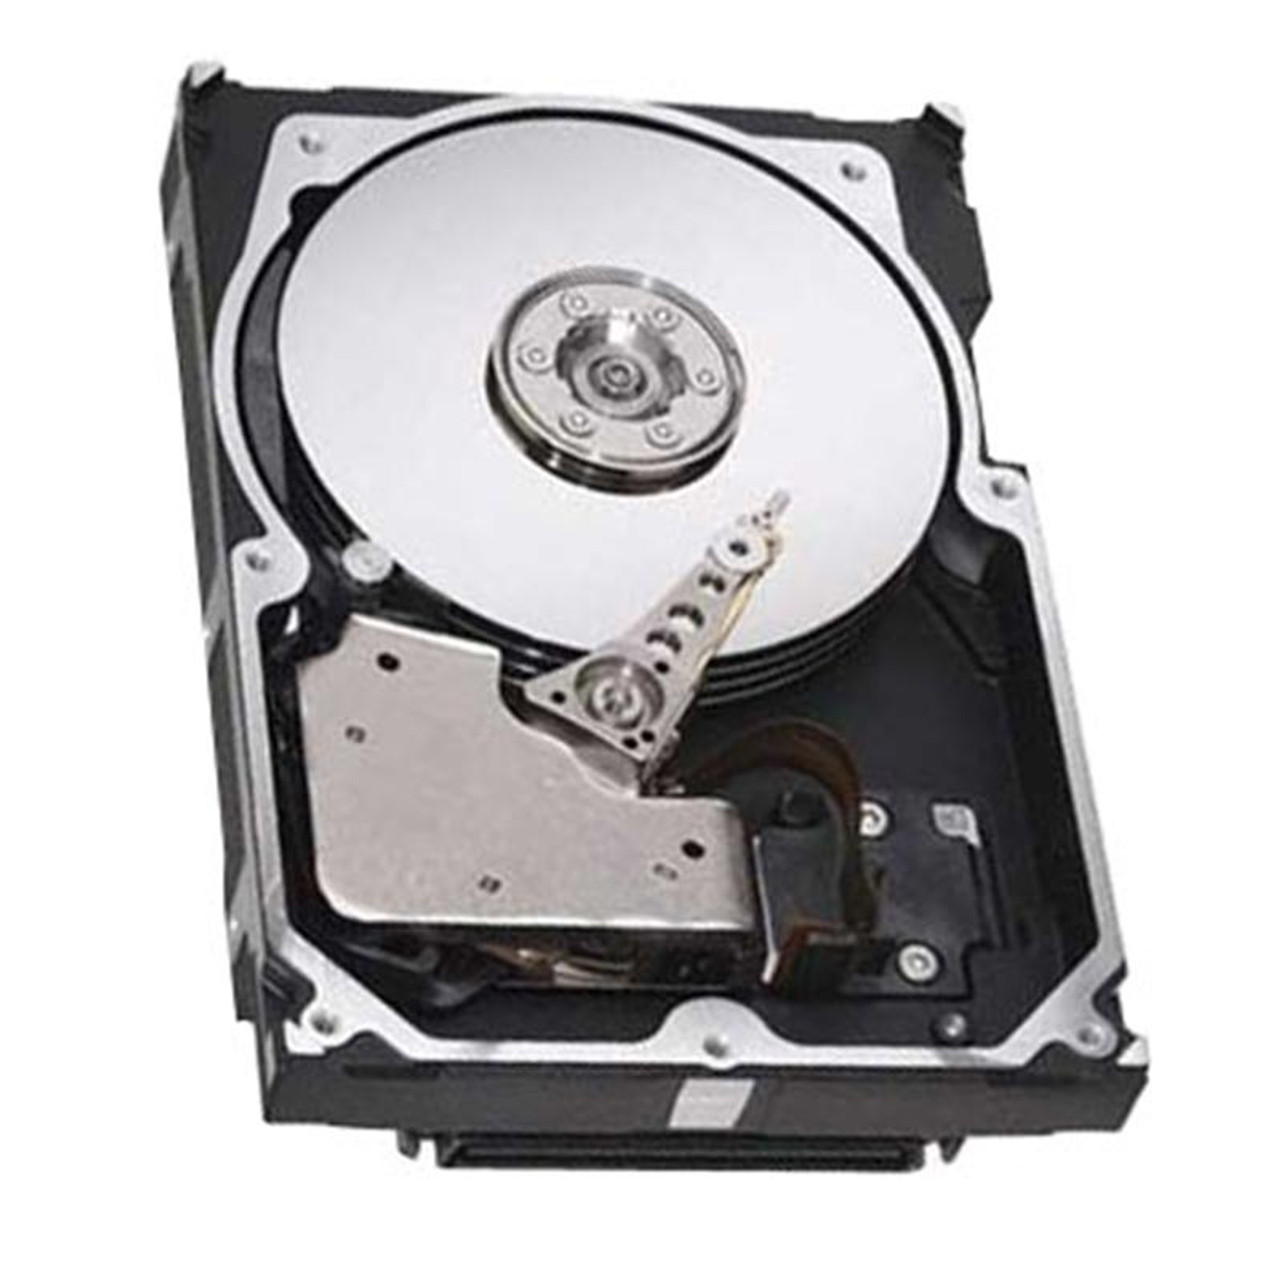 005048491 EMC 146GB 10000RPM Fibre Channel 2Gbps 8MB Cache 3.5-inch Internal Hard Drive for CLARiiON CX Series Storage Systems